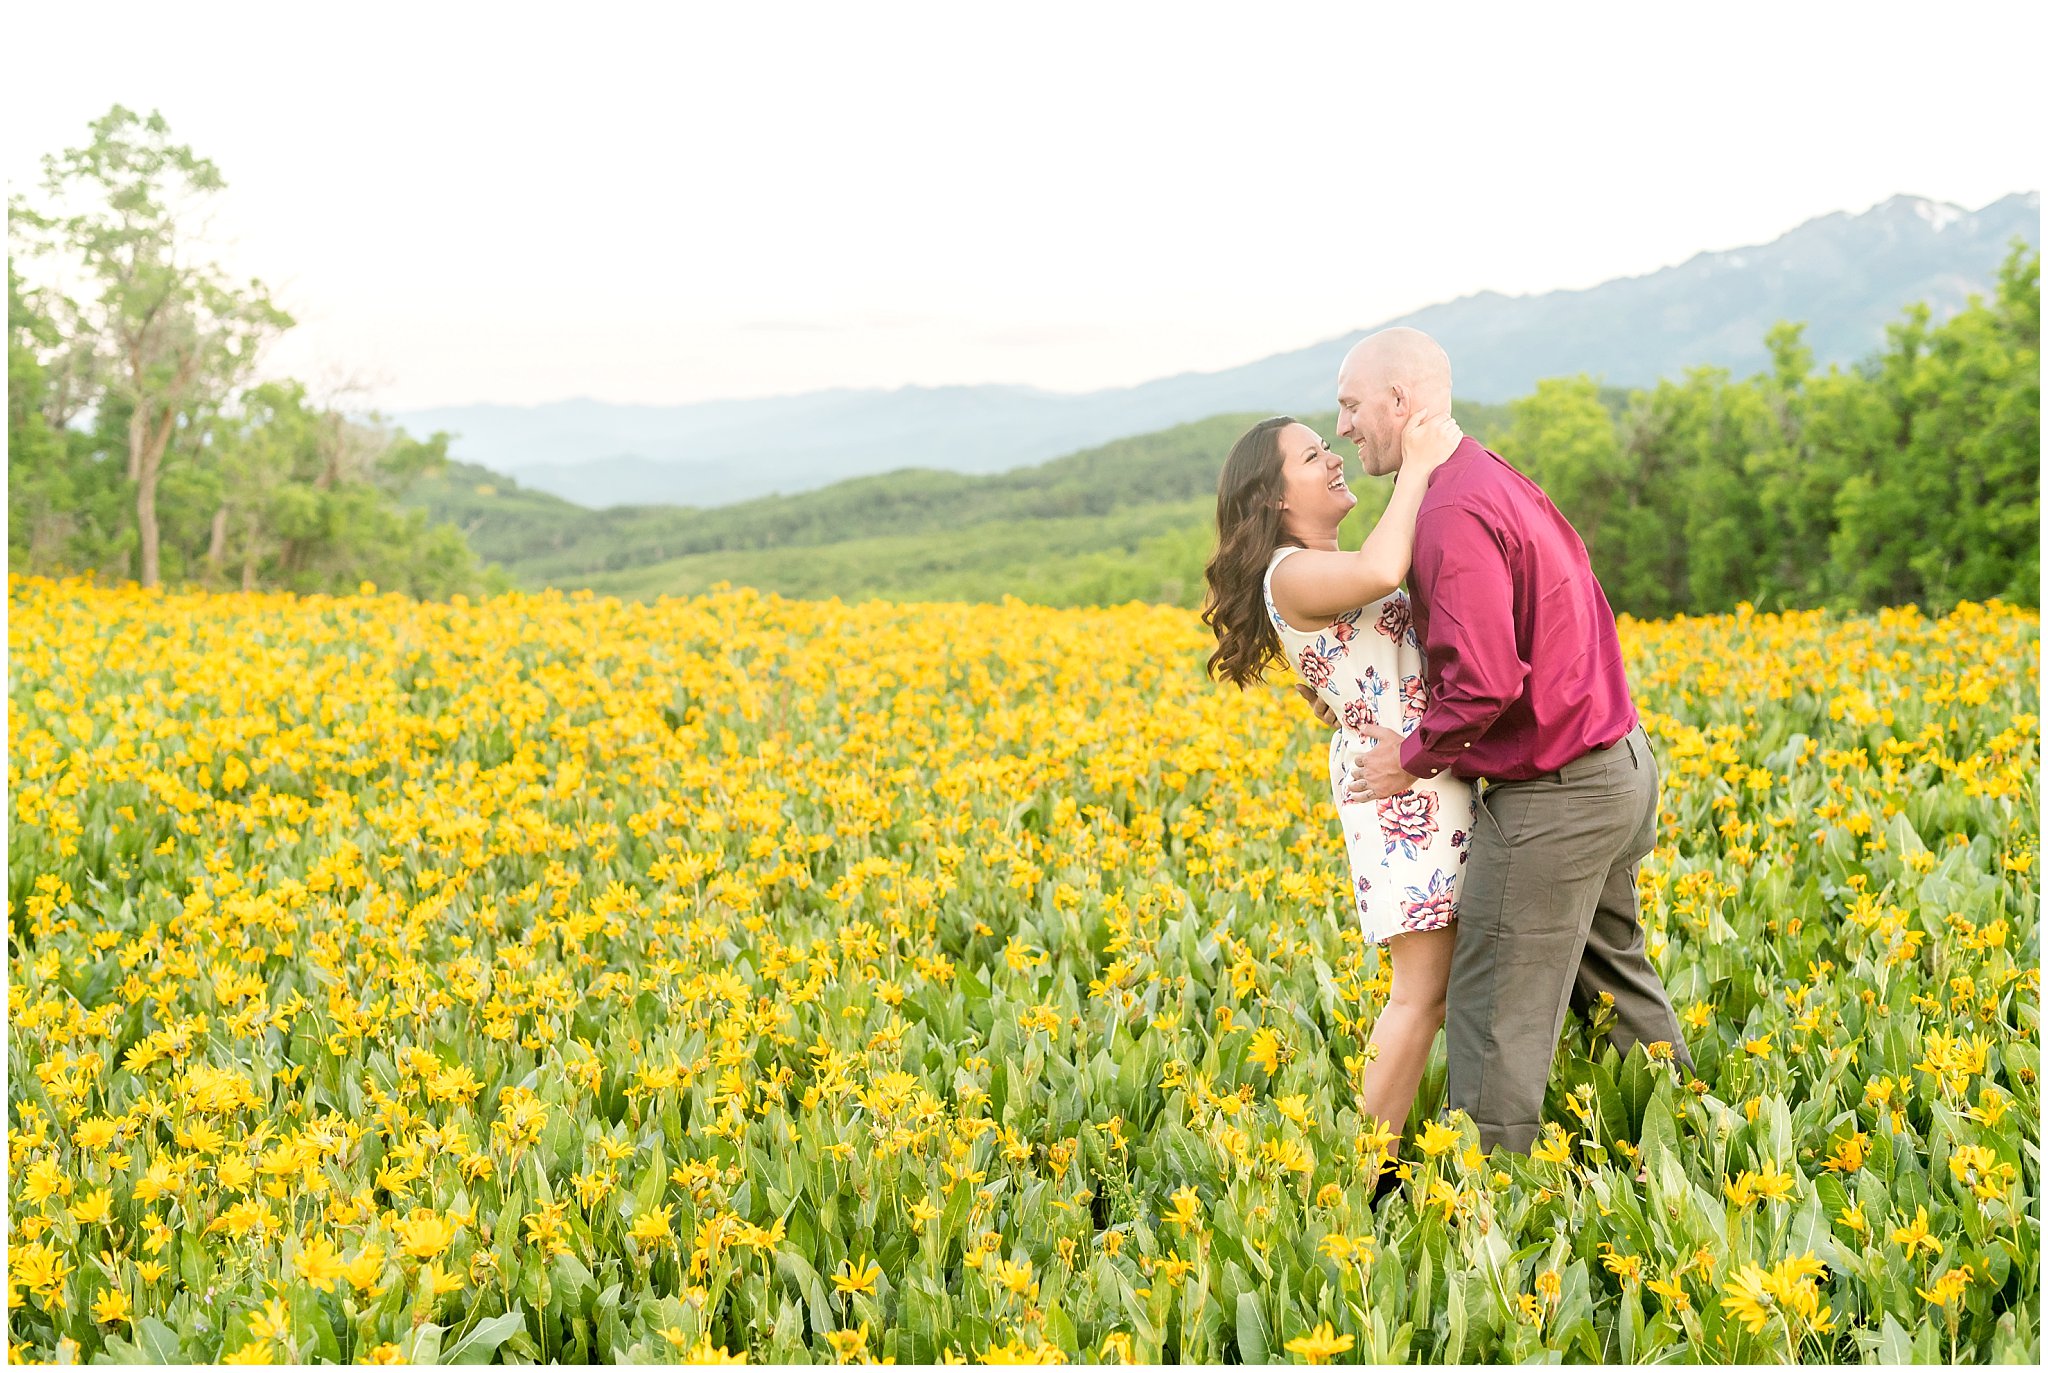 Couple's romantic engagement session in the mountains with wildflowers | Snowbasin Utah Engagements